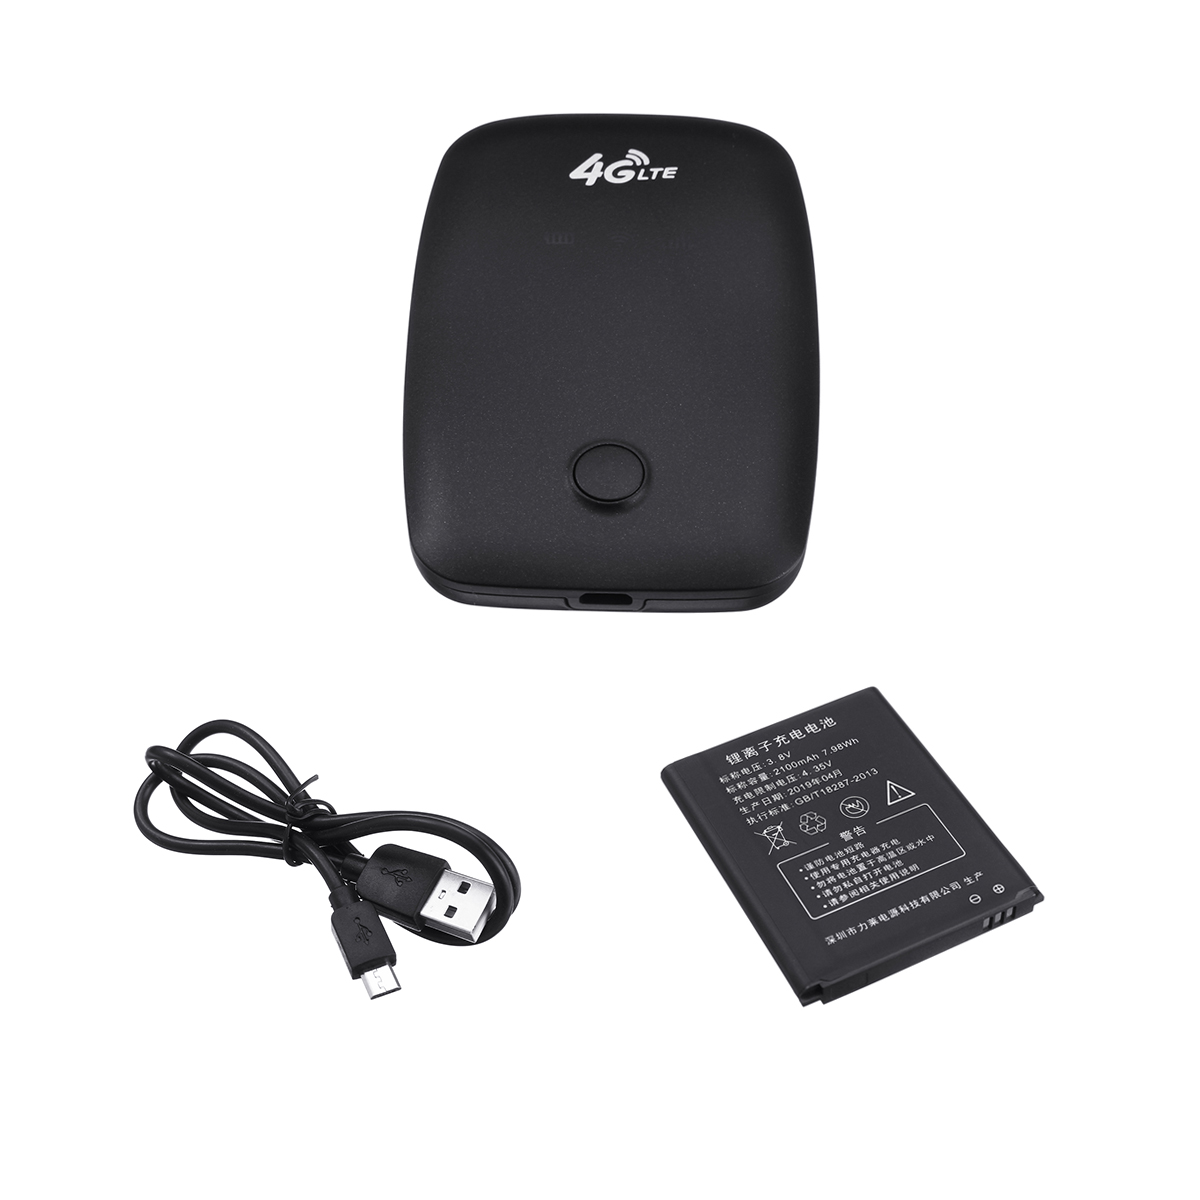 3Mode 4G 3G 2G WiFi Wireless Portable Pocket Router Support 32G TF Card Suitable for PC Mobile 18